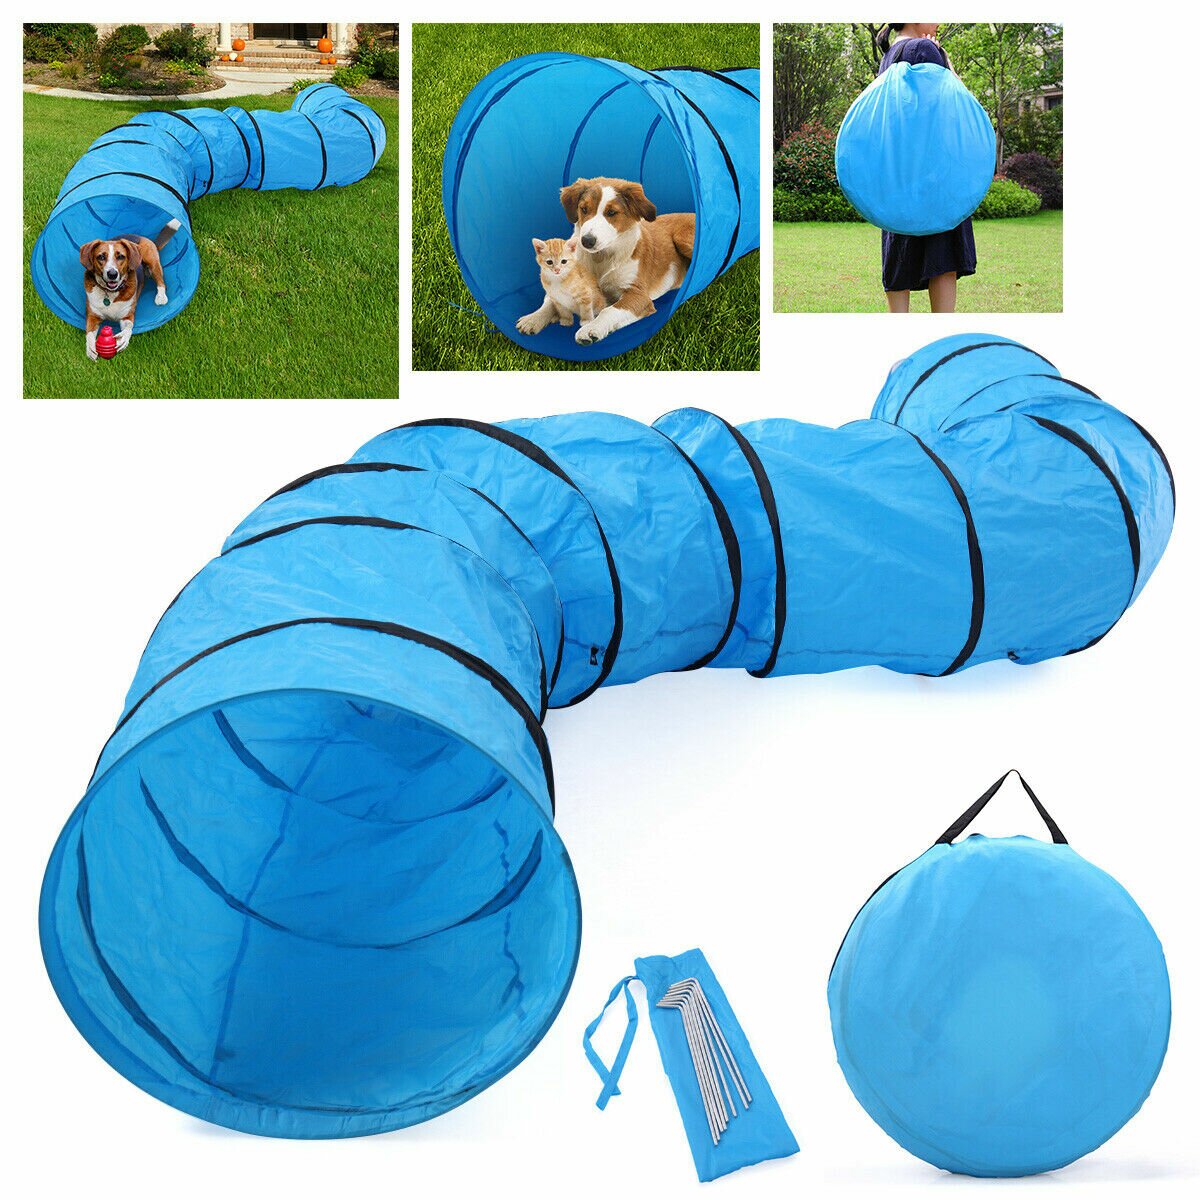 Dia.24 Yaheetech 18ft Pet Dog Agility Obedience Training Tunnel Blue 